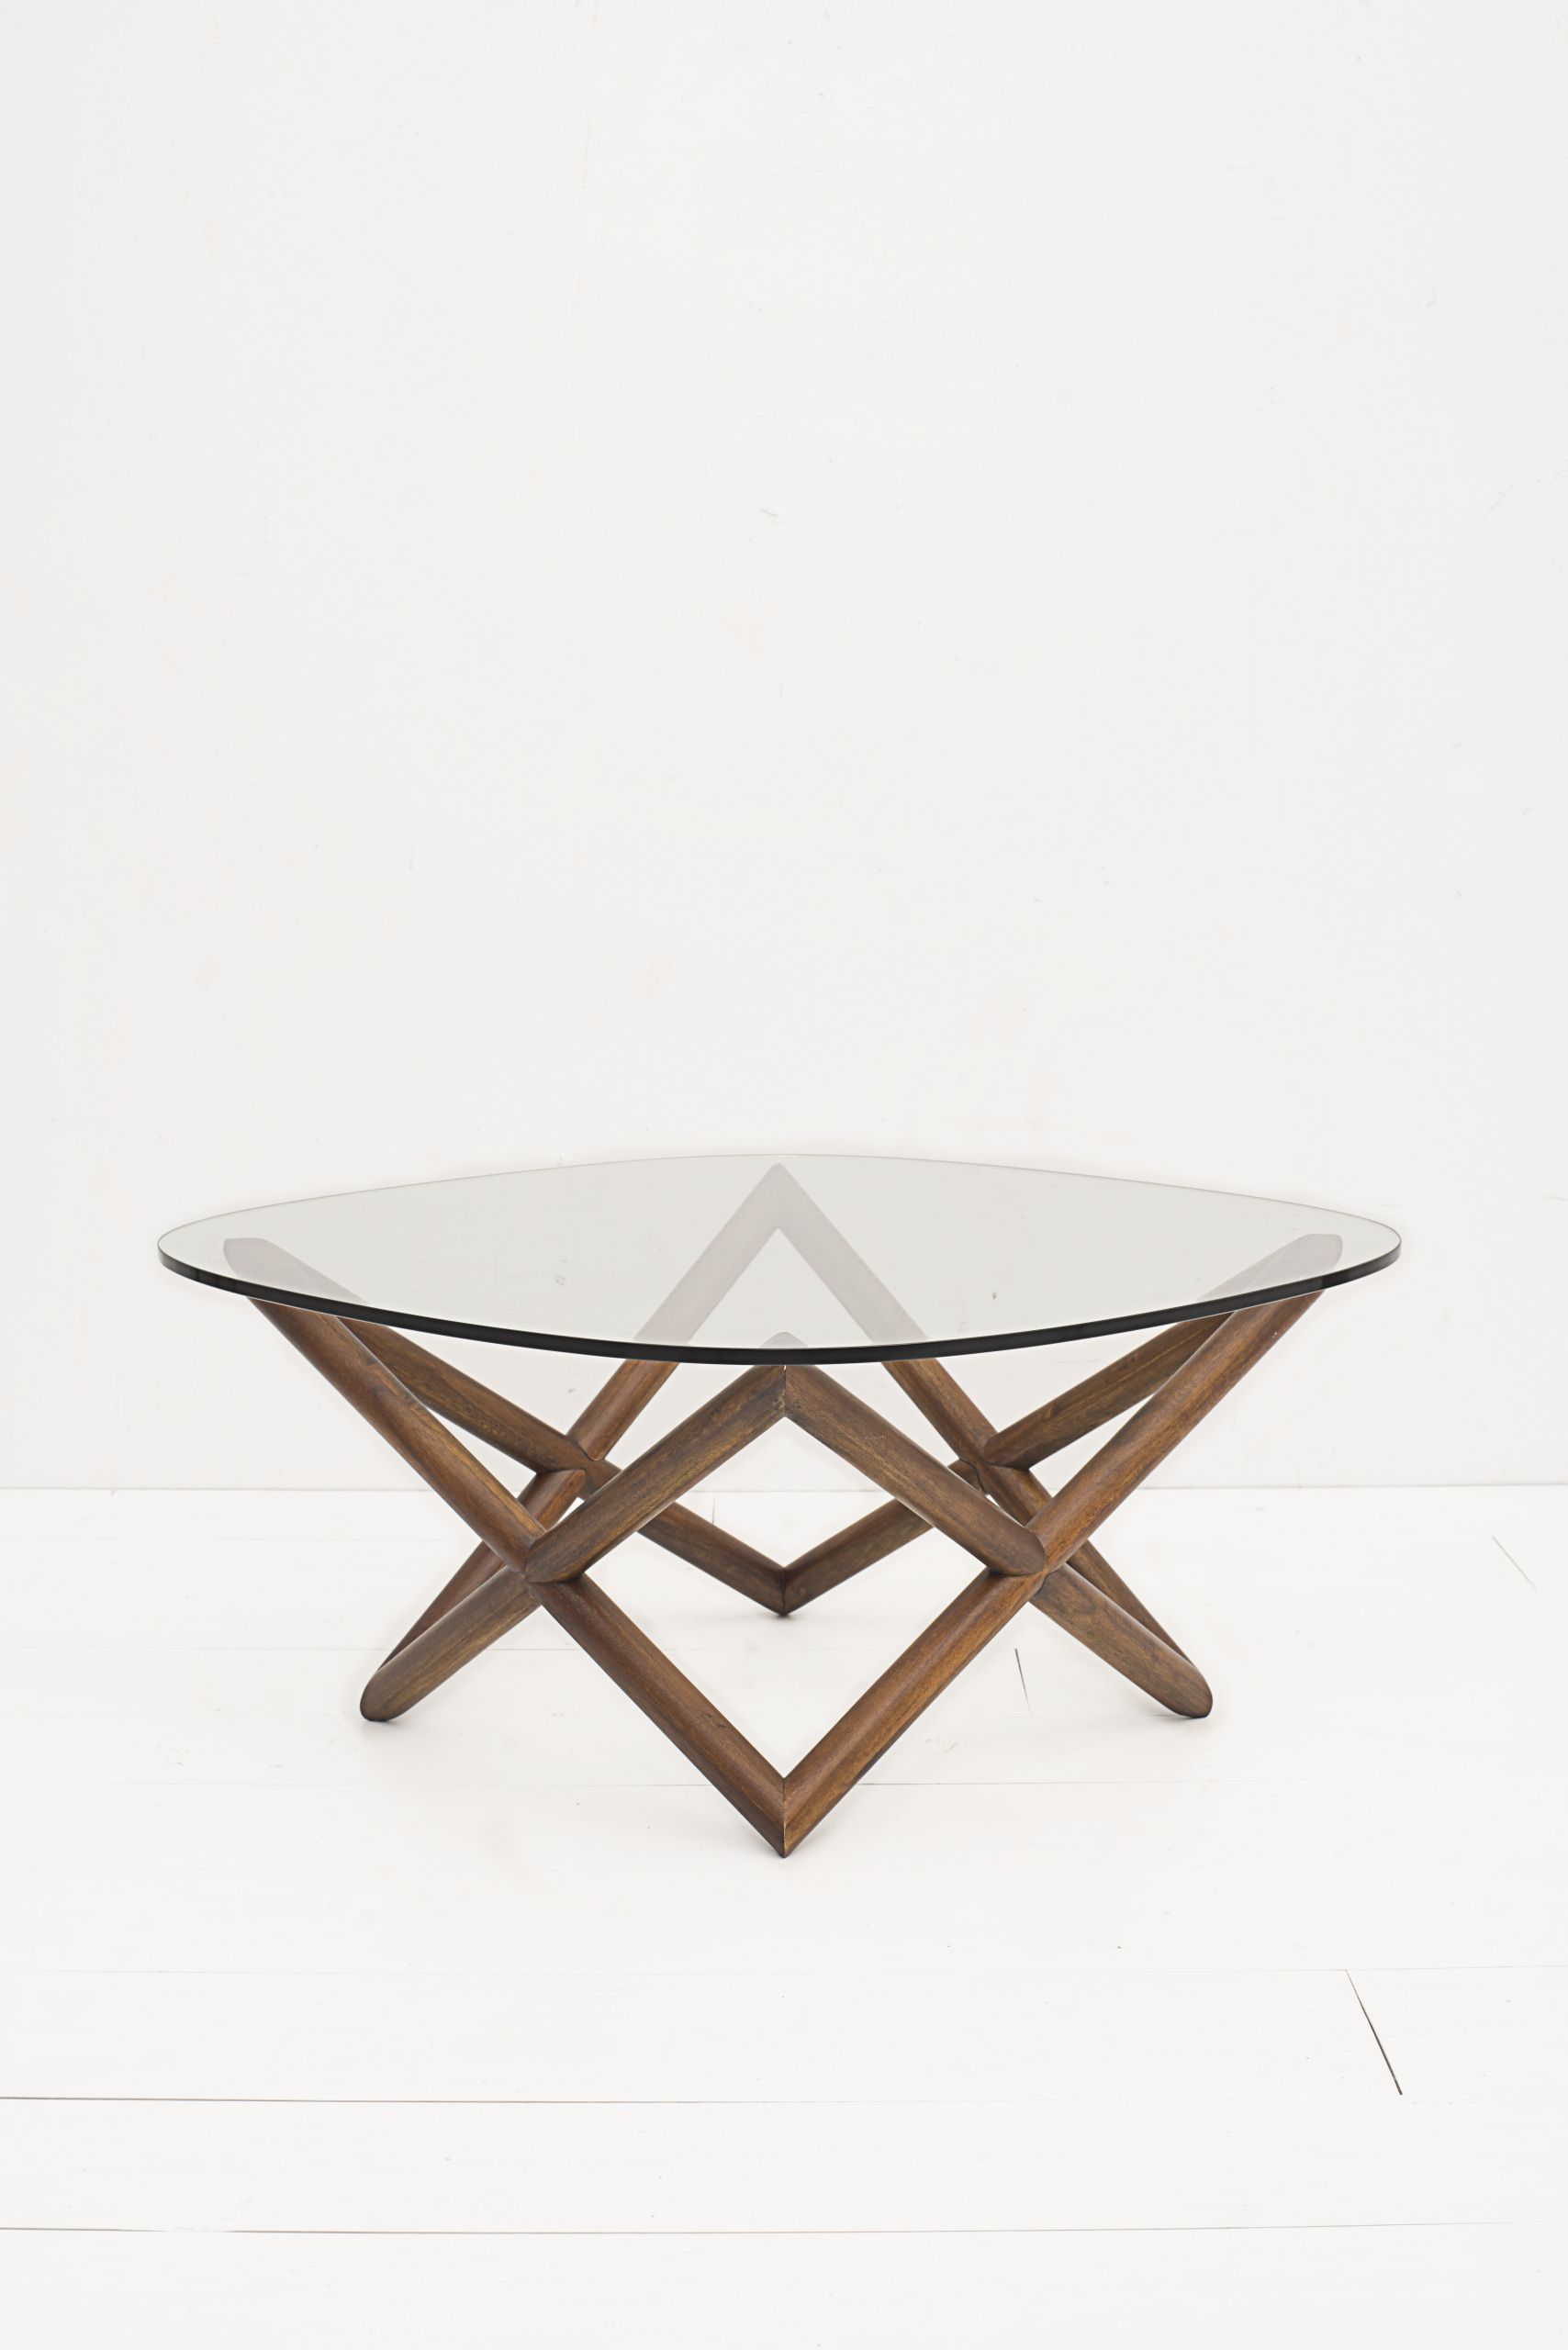 Geometric Coffee Table T048 Pertaining To Geometric Coffee Tables (View 8 of 15)